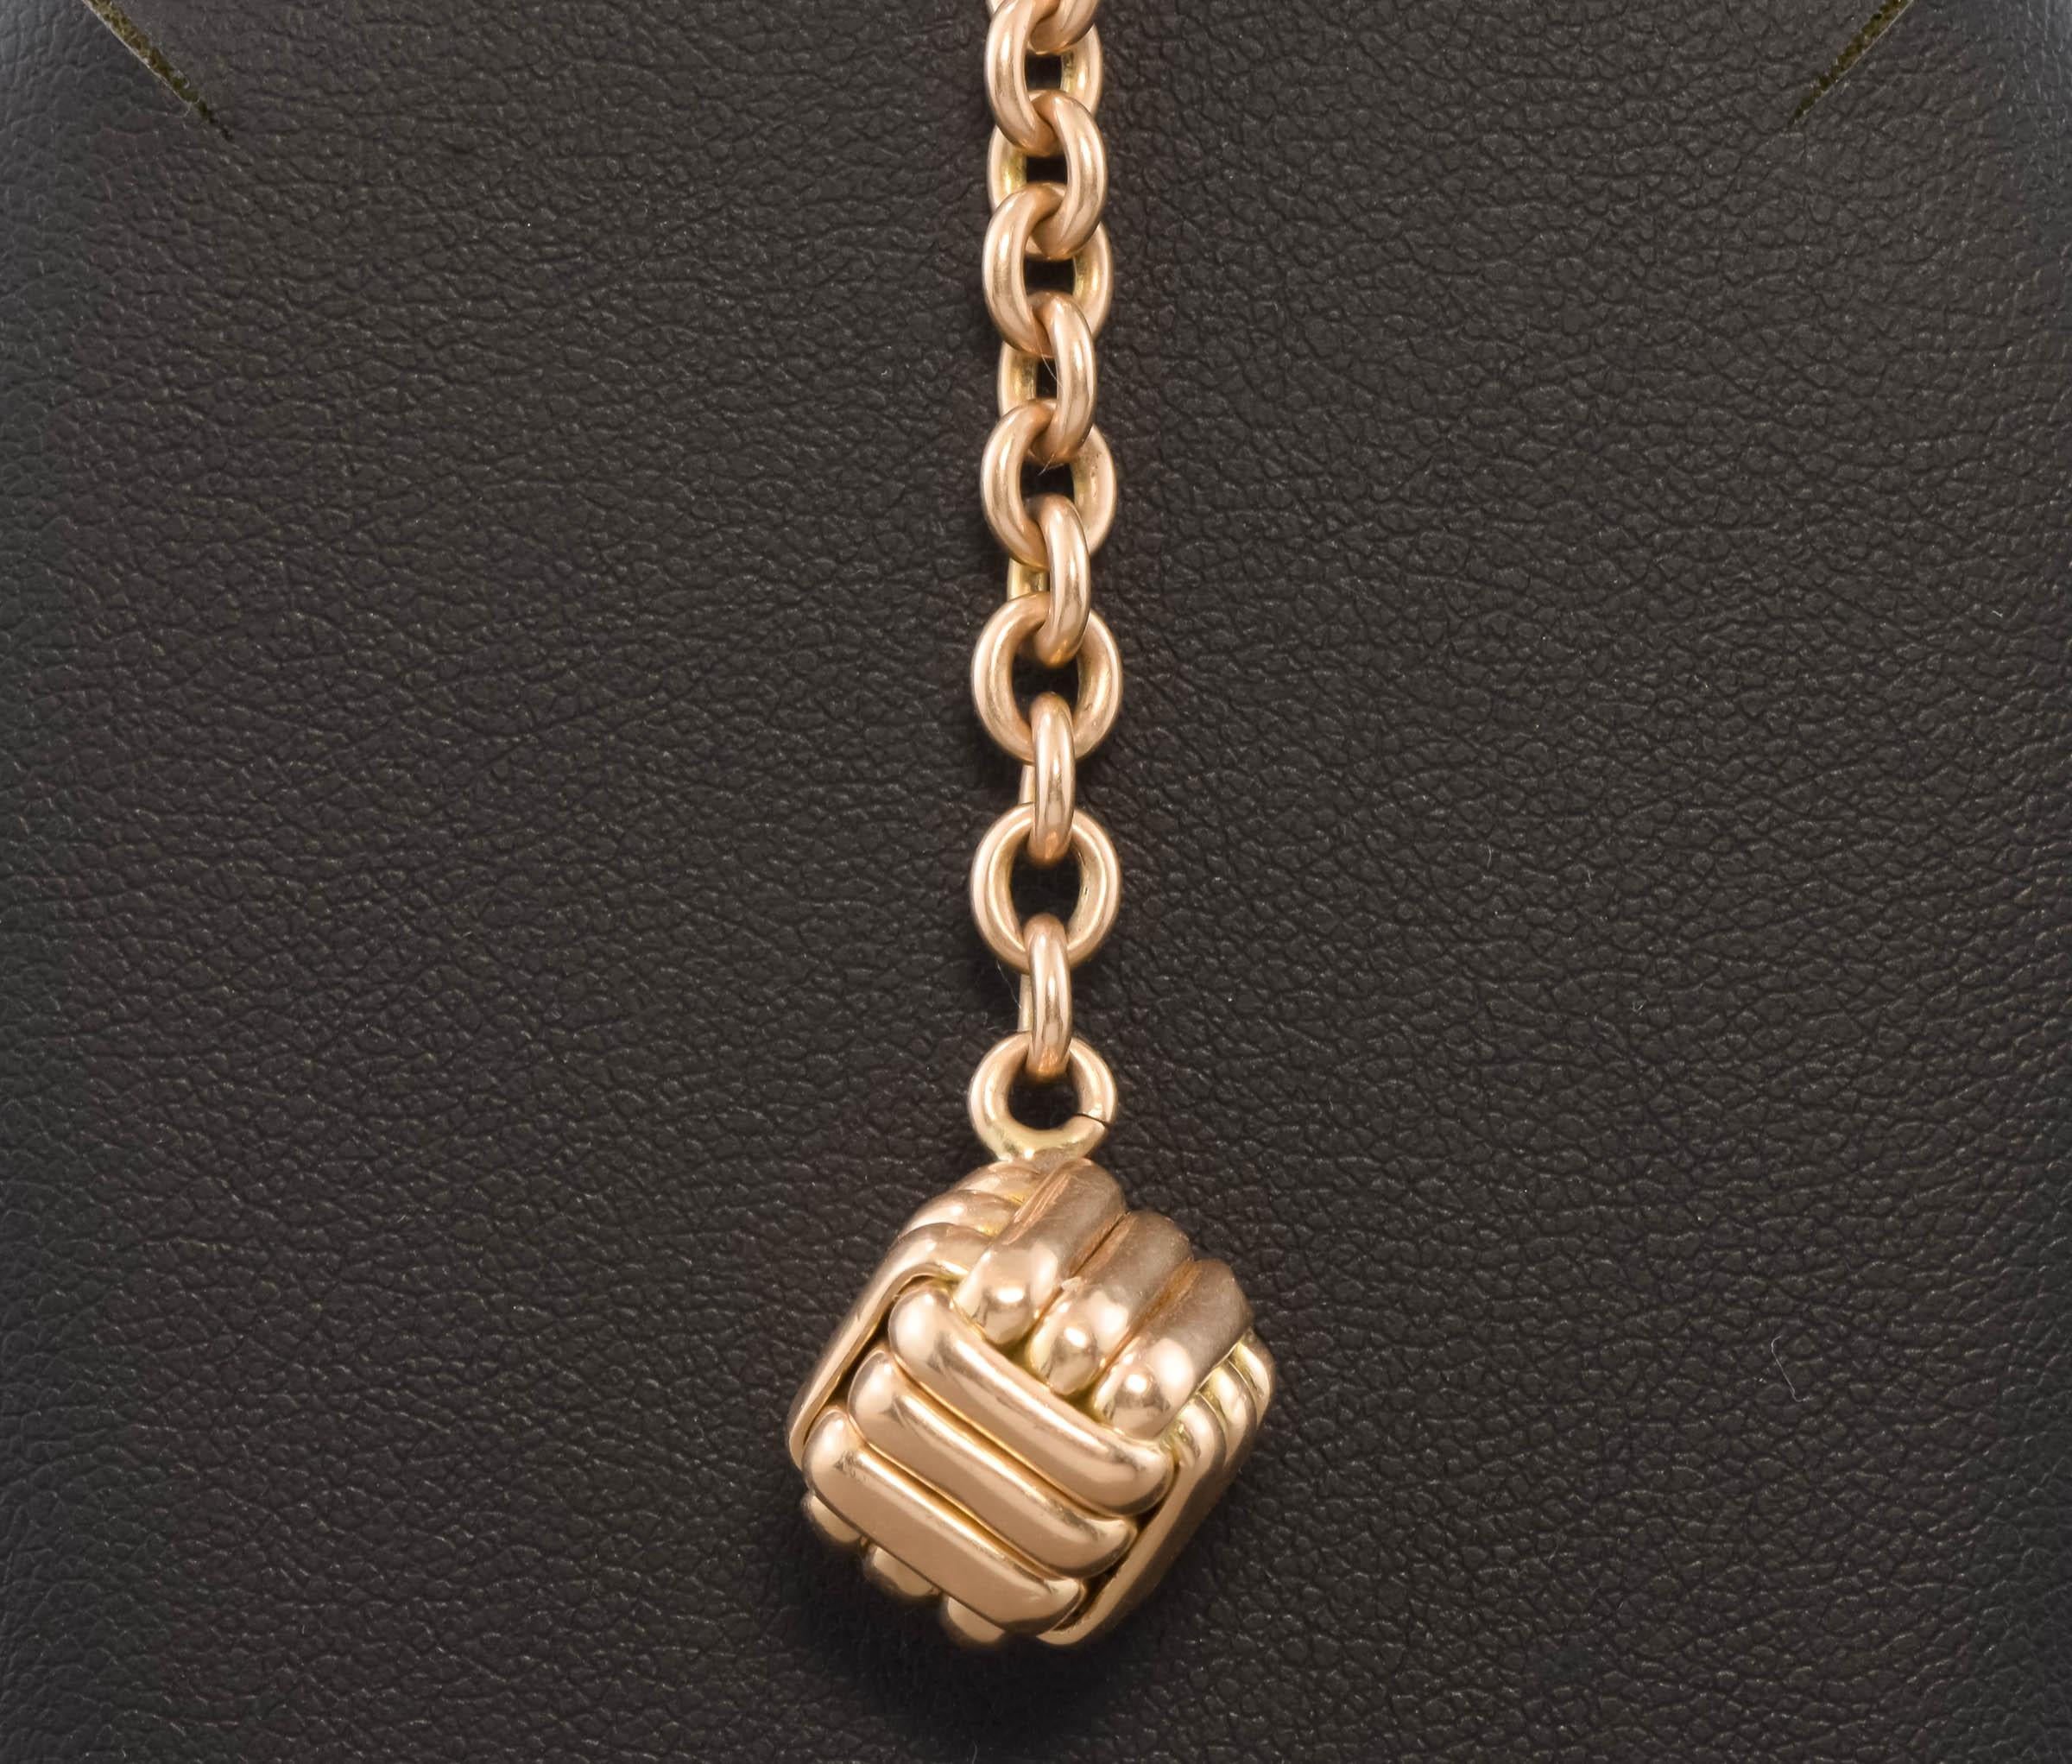 Antique 14K Gold Cube Watch Fob with Watch Chain & Dog Clasp In Good Condition For Sale In Danvers, MA